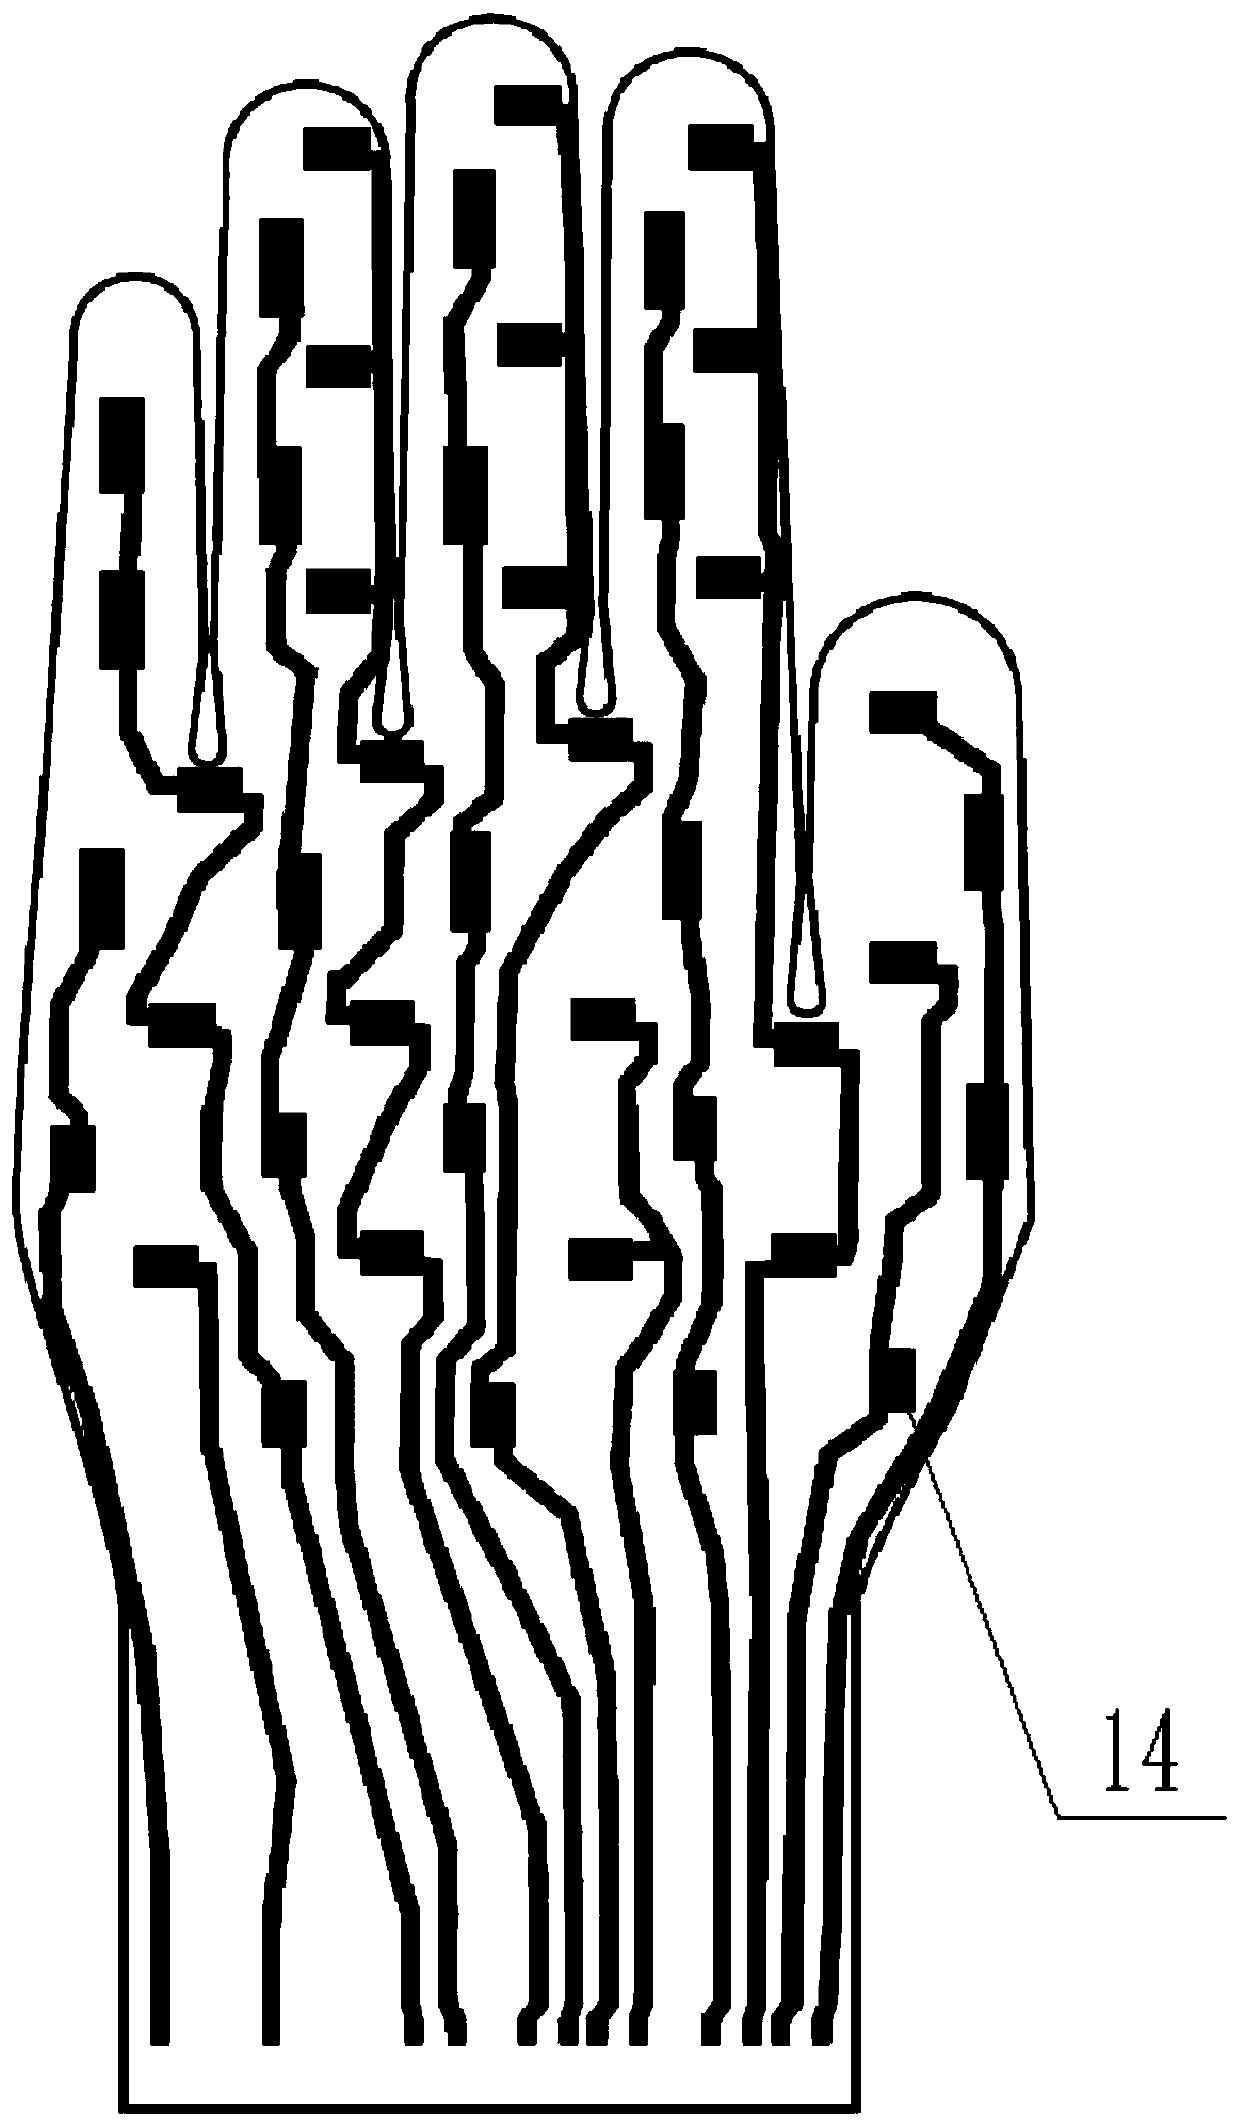 Data glove for gesture recognition and gesture recognition method